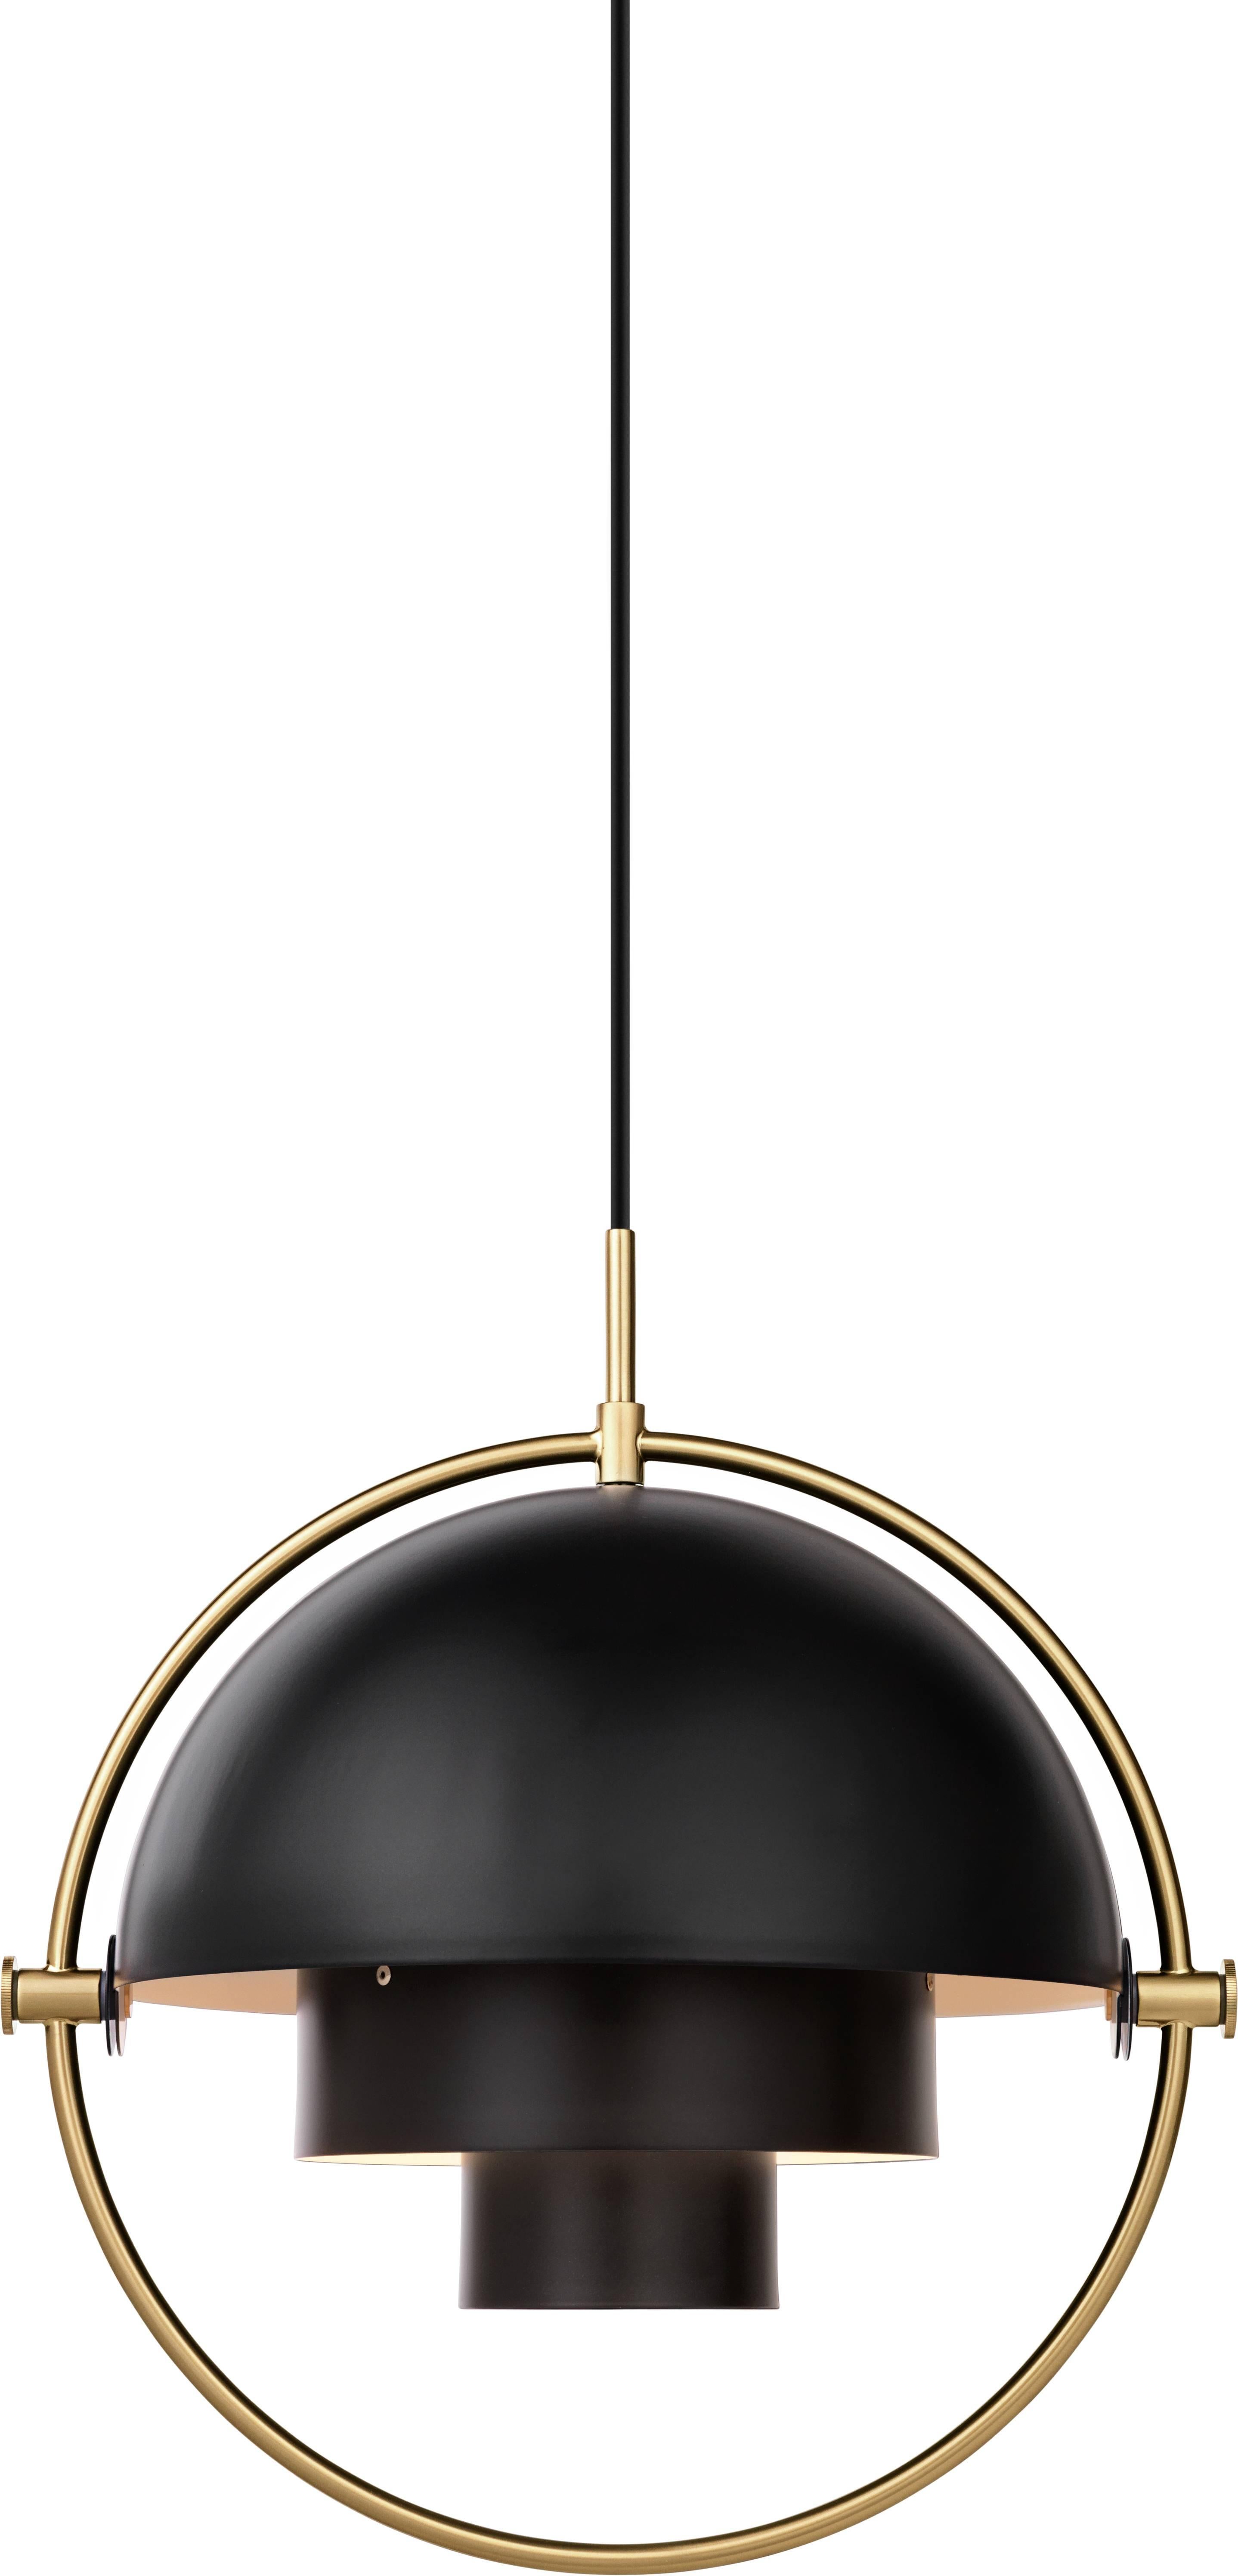 Brass multi-light pendant, Louis Weisdorf

Dimensions: 36 x 36 x 36 cm
Material: Brass
Designer: Louis Weisdorf
Produced by Gubi in Denmark

The Multi-Lite pendant embraces the golden era of Danish design with its characteristic shape of two